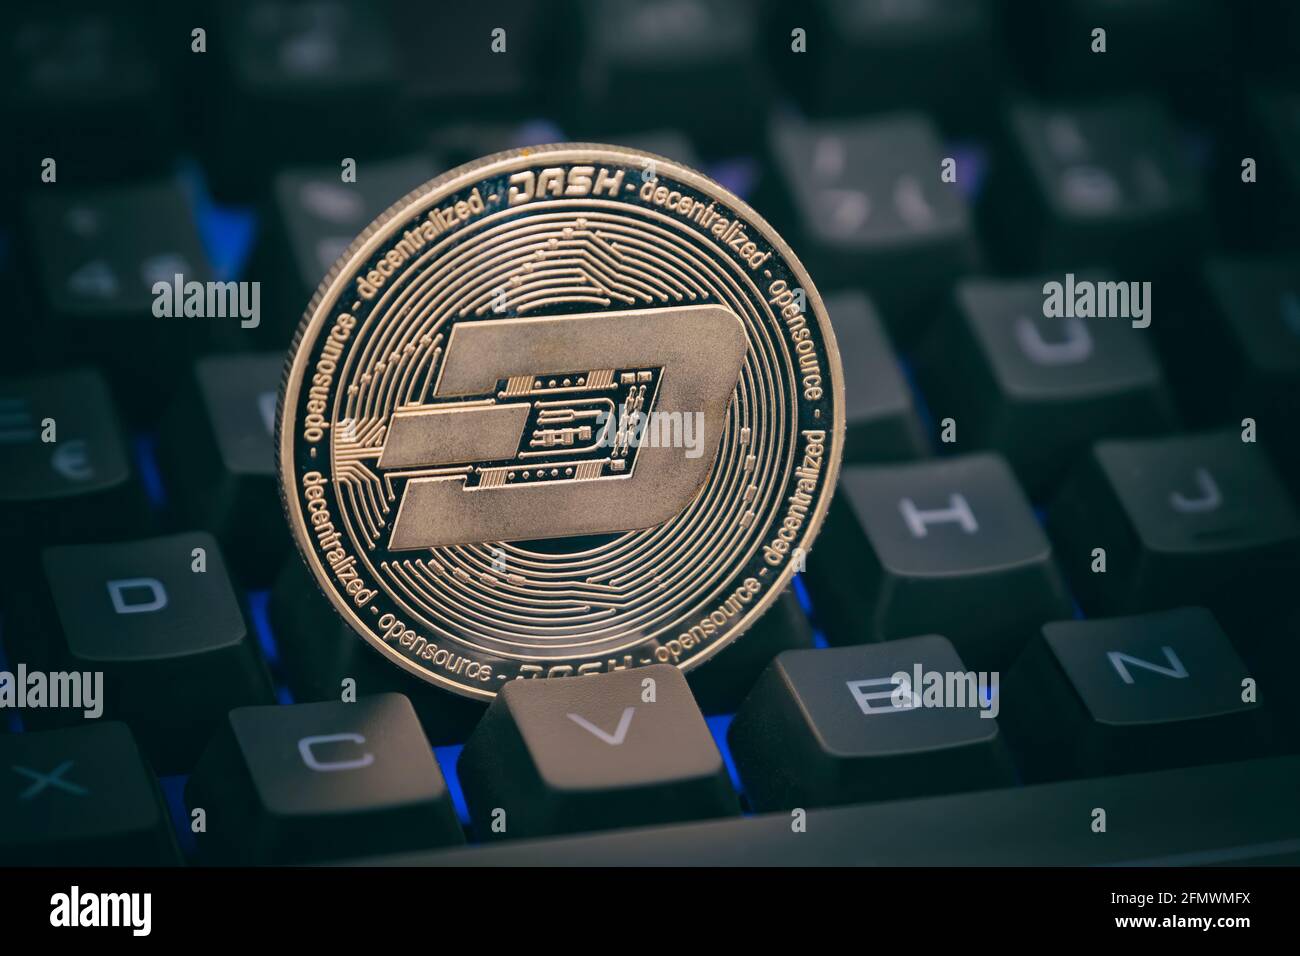 Physical Dash Coin Between The Keys Of A Computer Keyboard Stock Photo